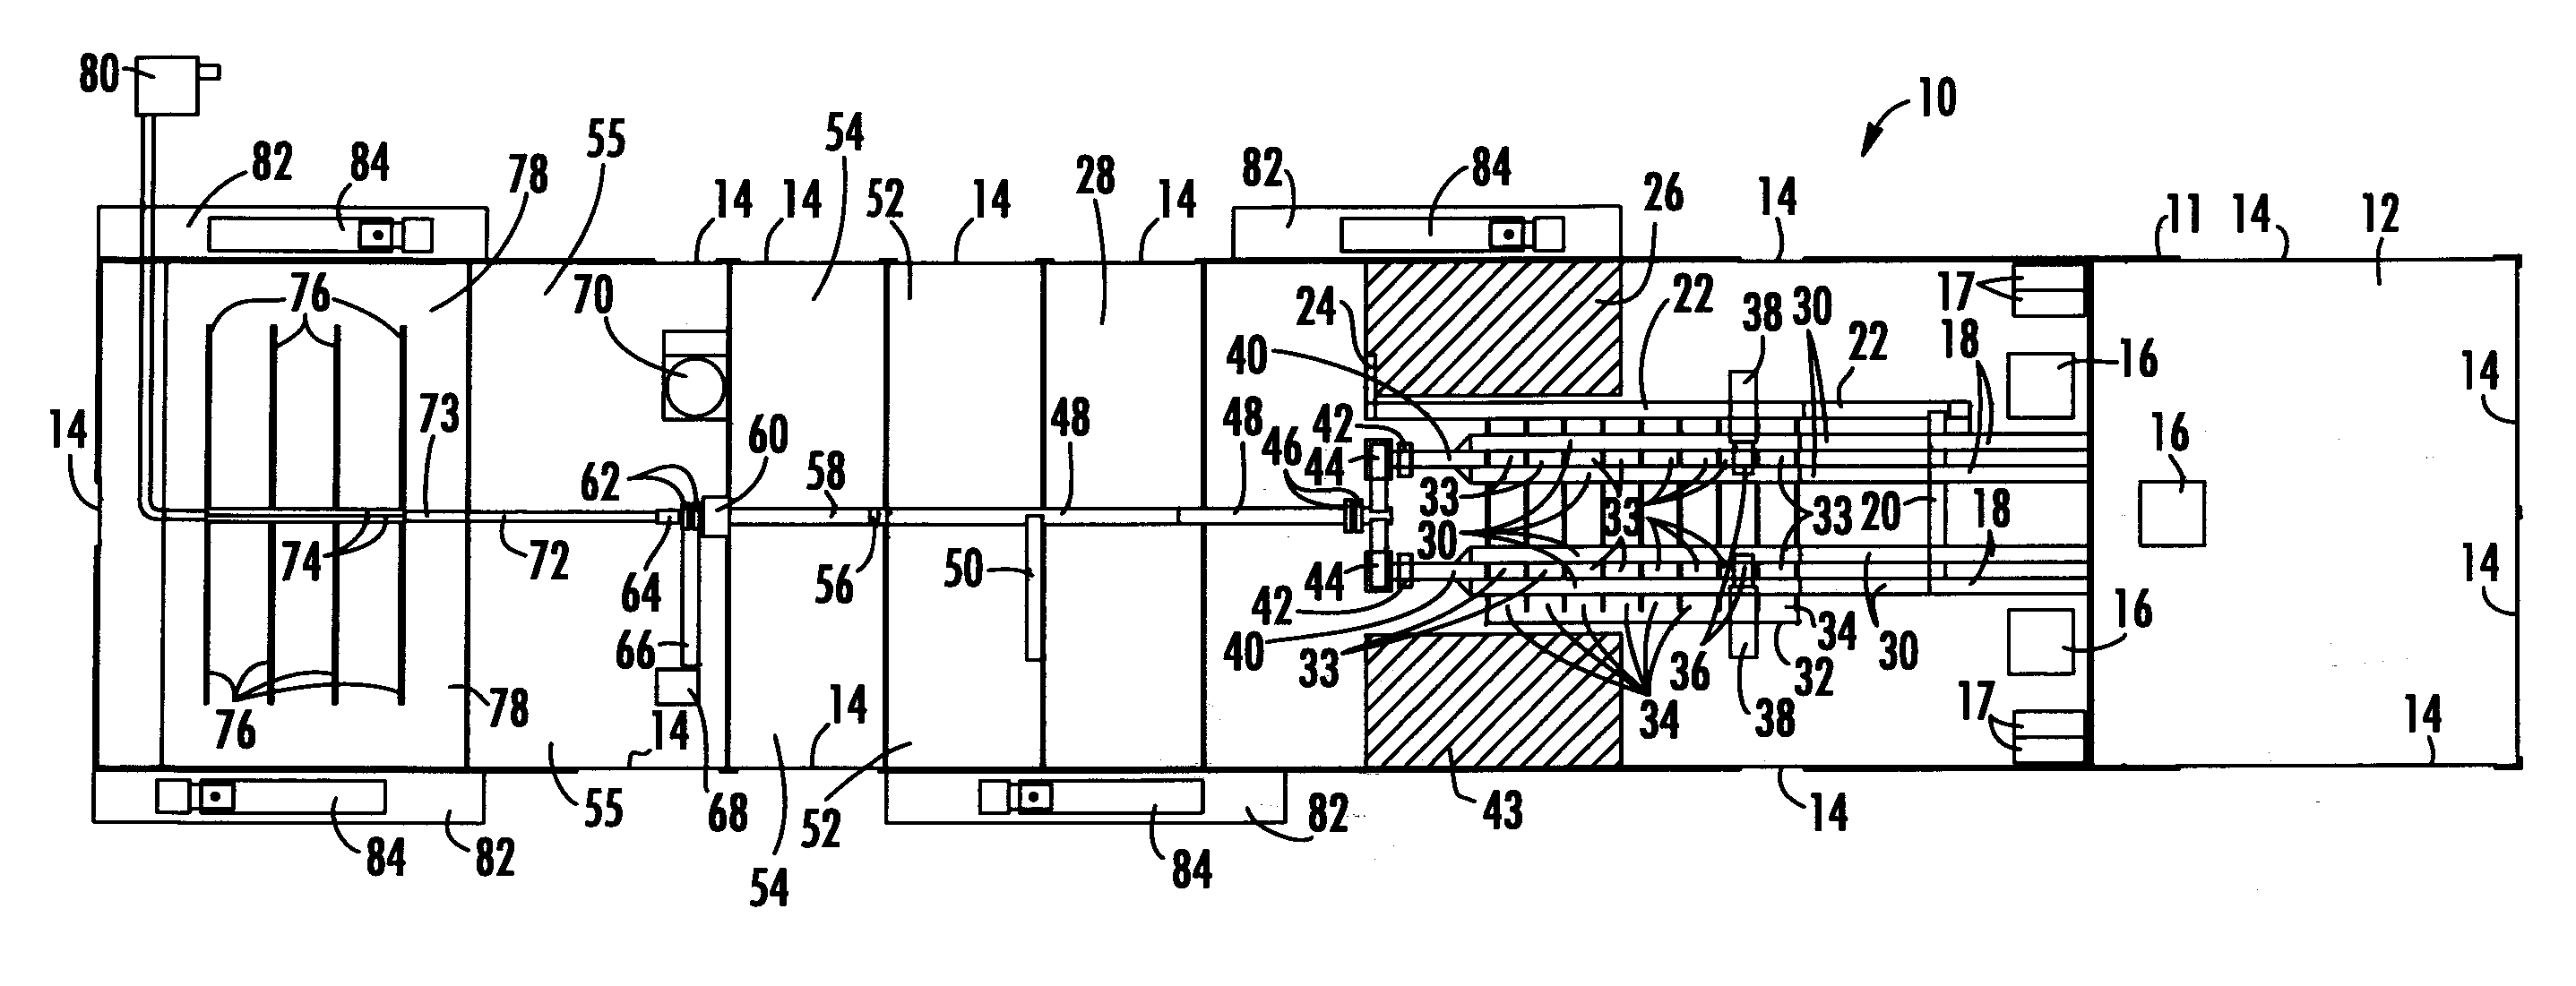 Construction and demolition waste recycling system and method